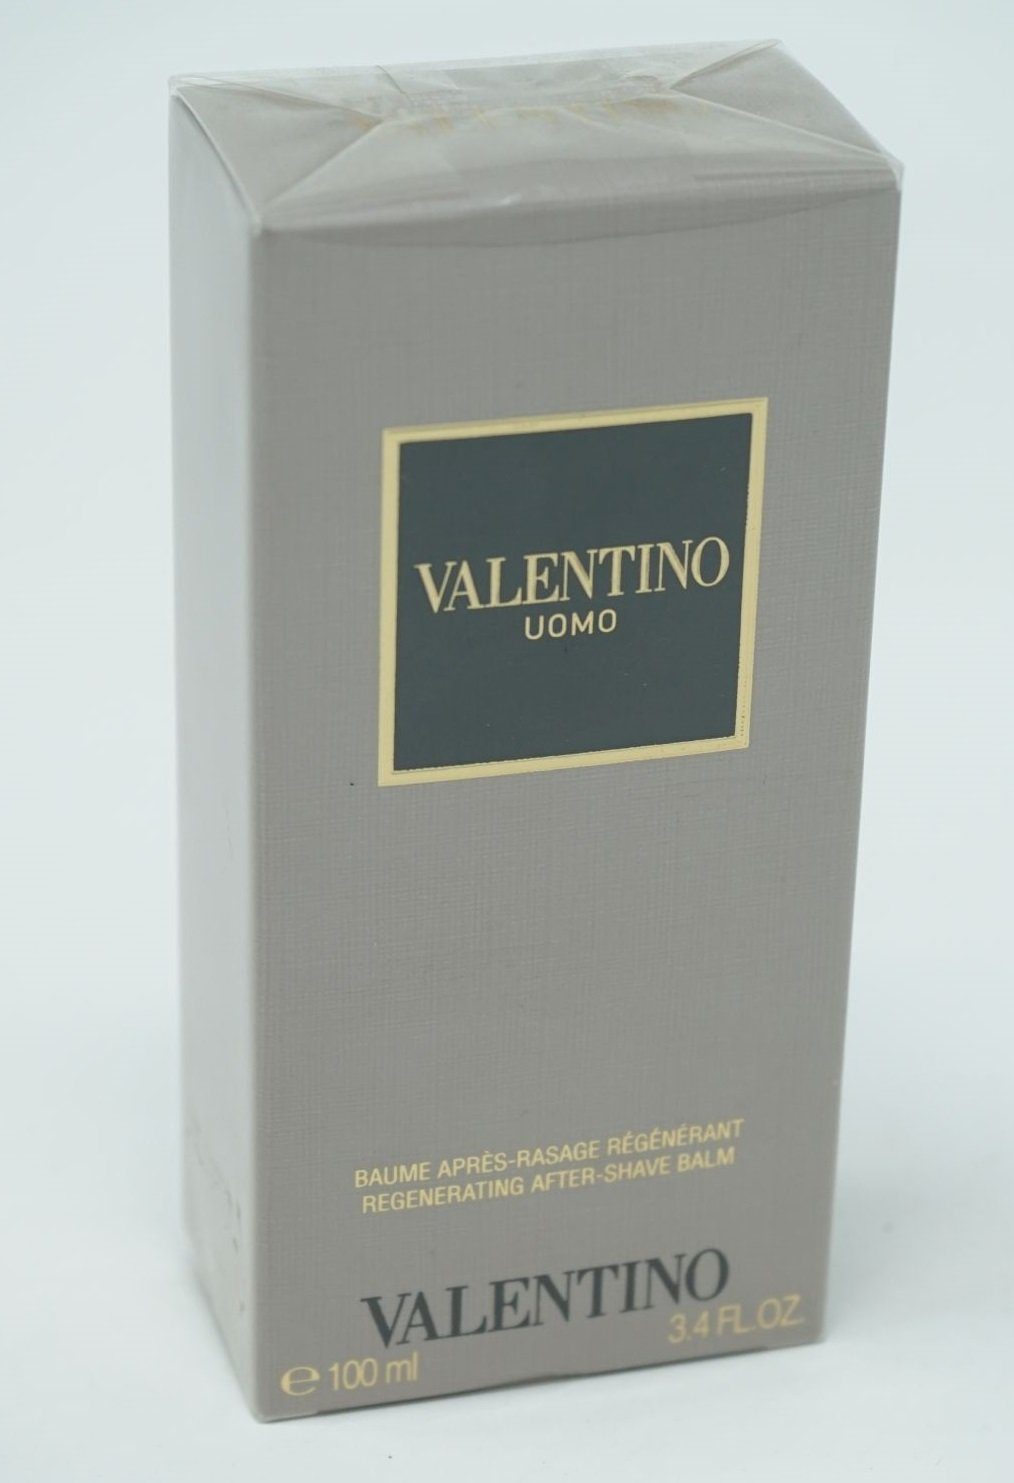 Valentino After-Shave After Valentino Uomo Balsam 100ml Shave Balm